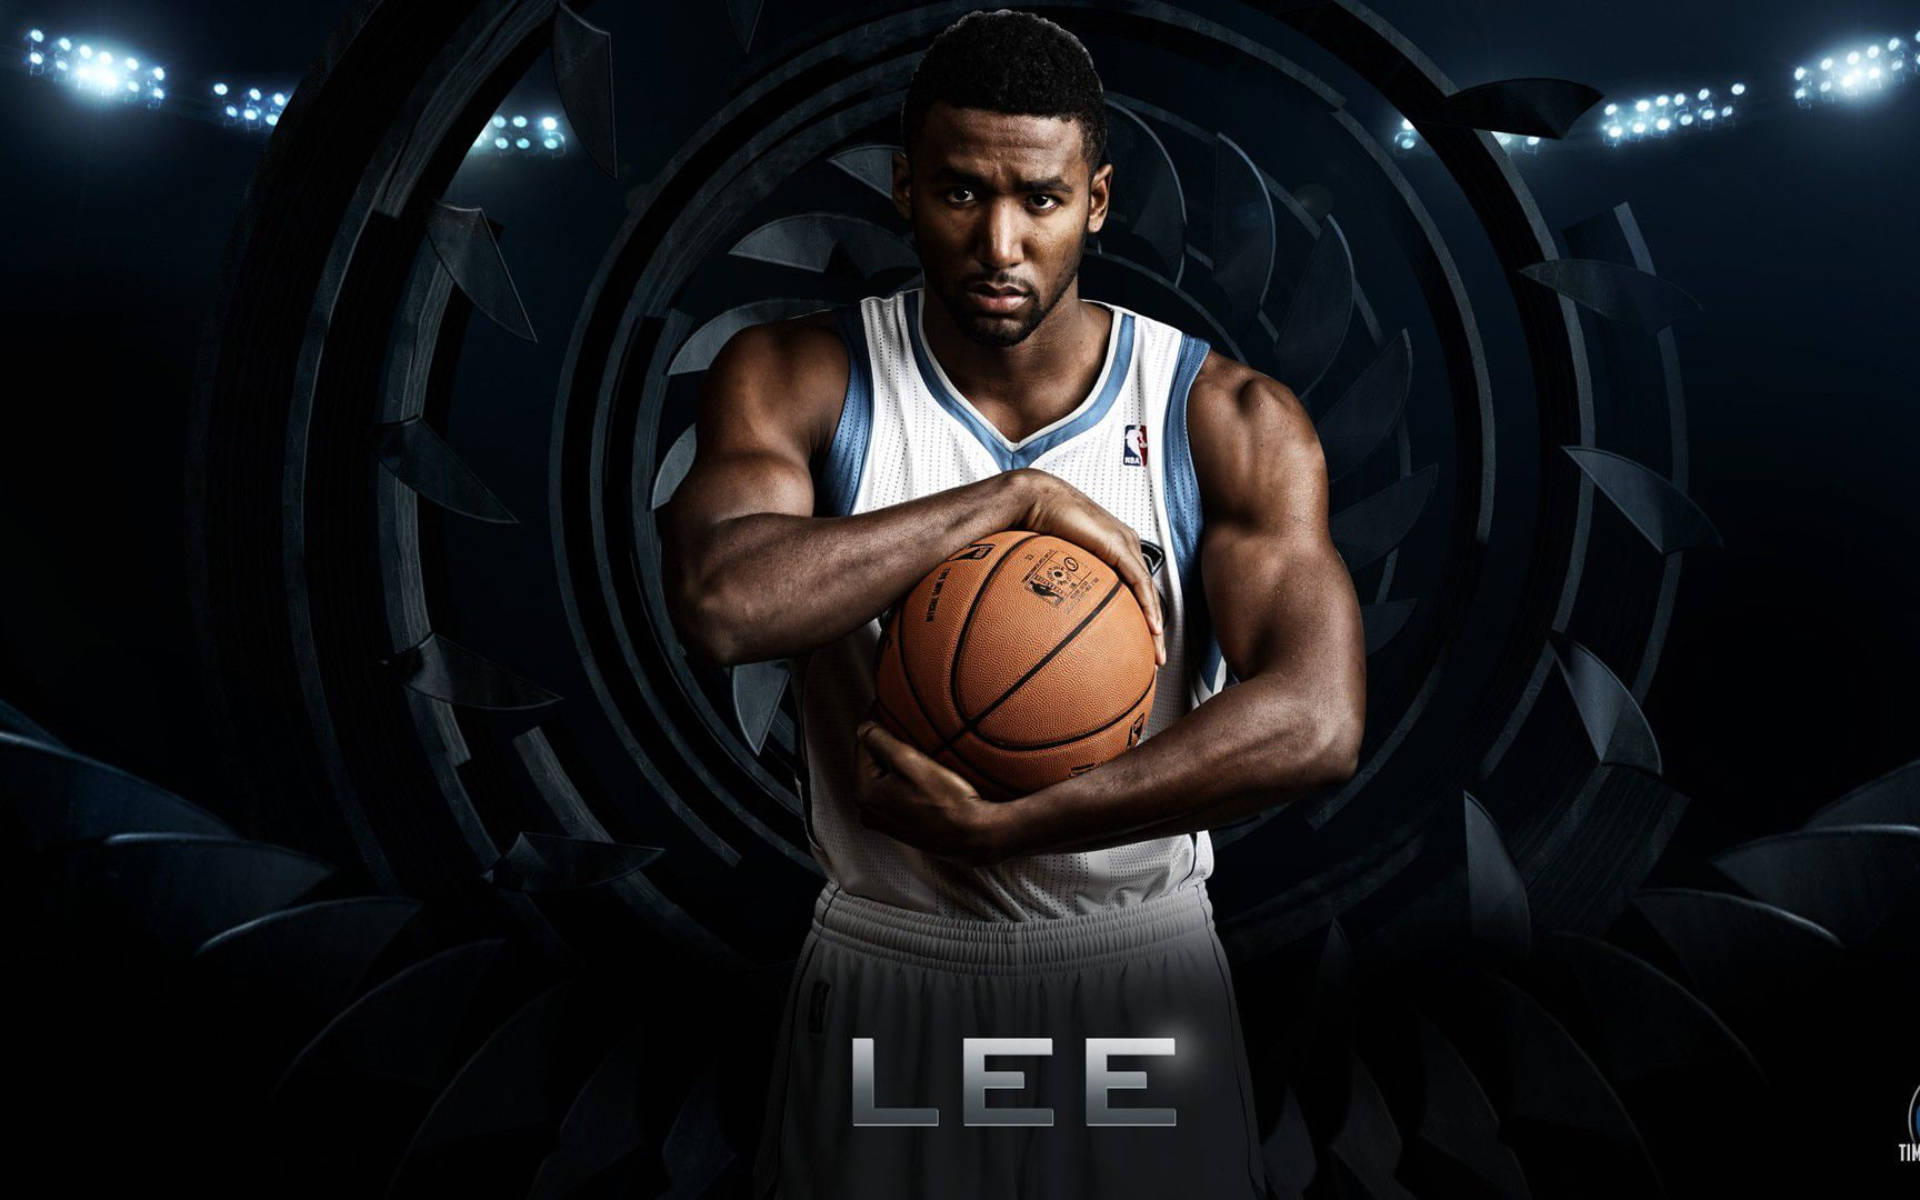 Minnesota Timberwolves Malcolm Lee Cover Background